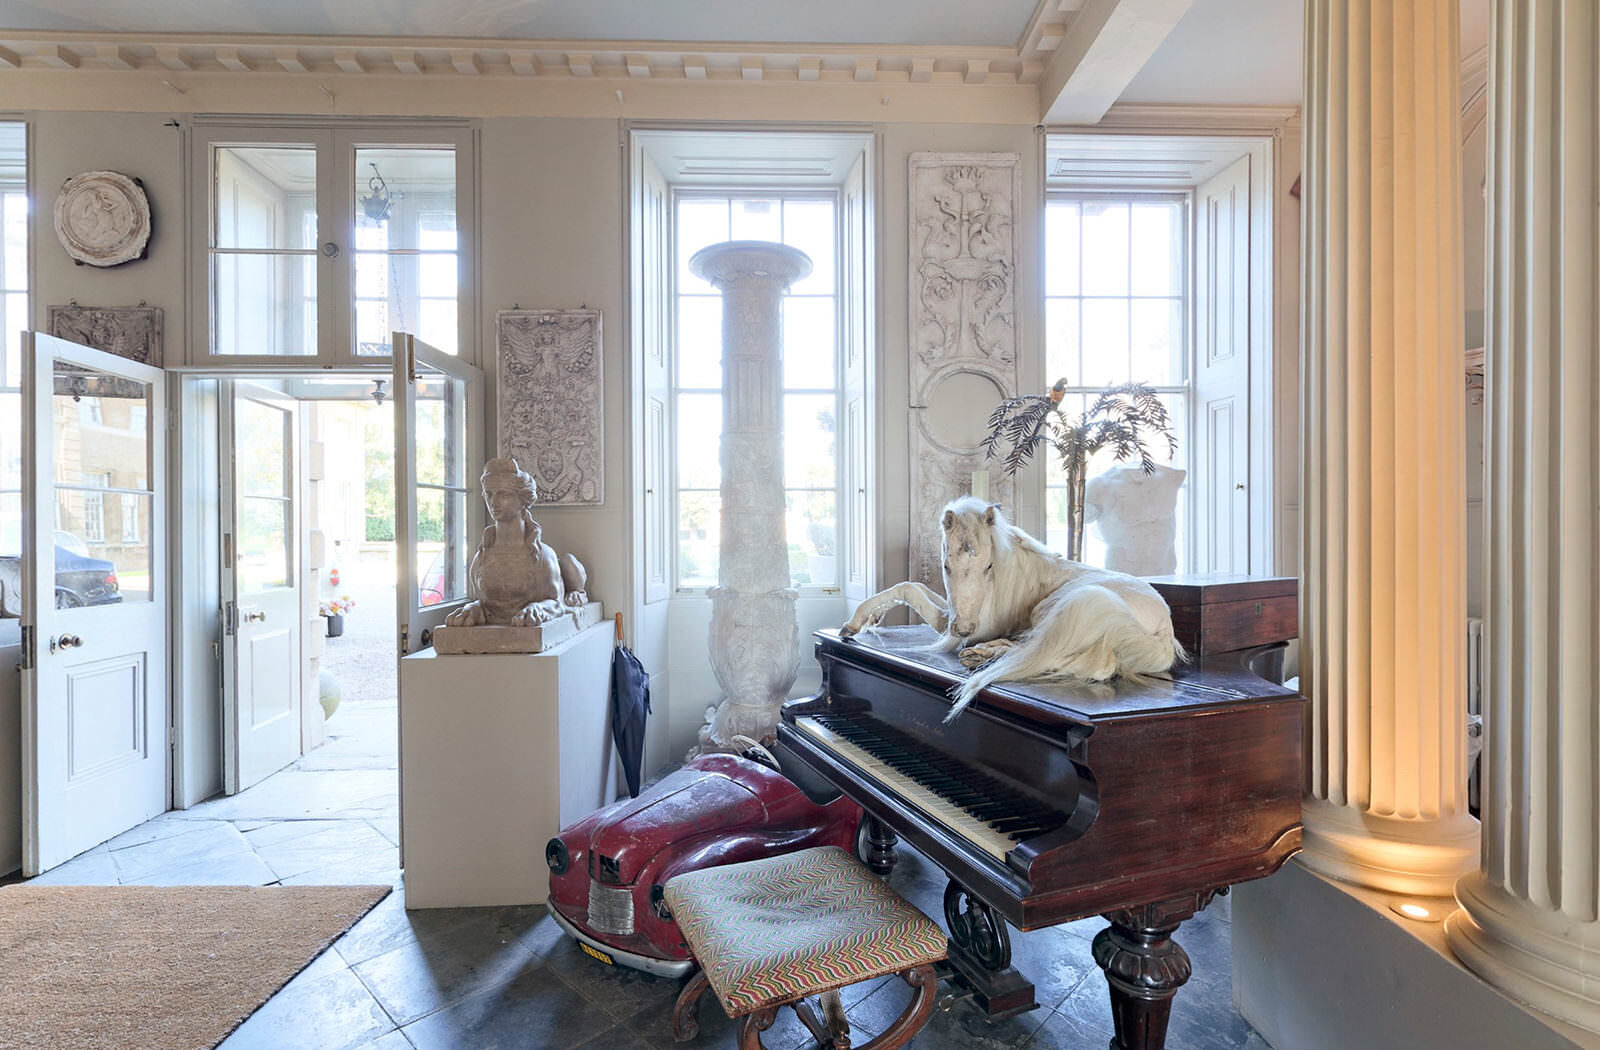 Aynhoe Park - still of the taxidermy unicorn on the piano from the virtual tour